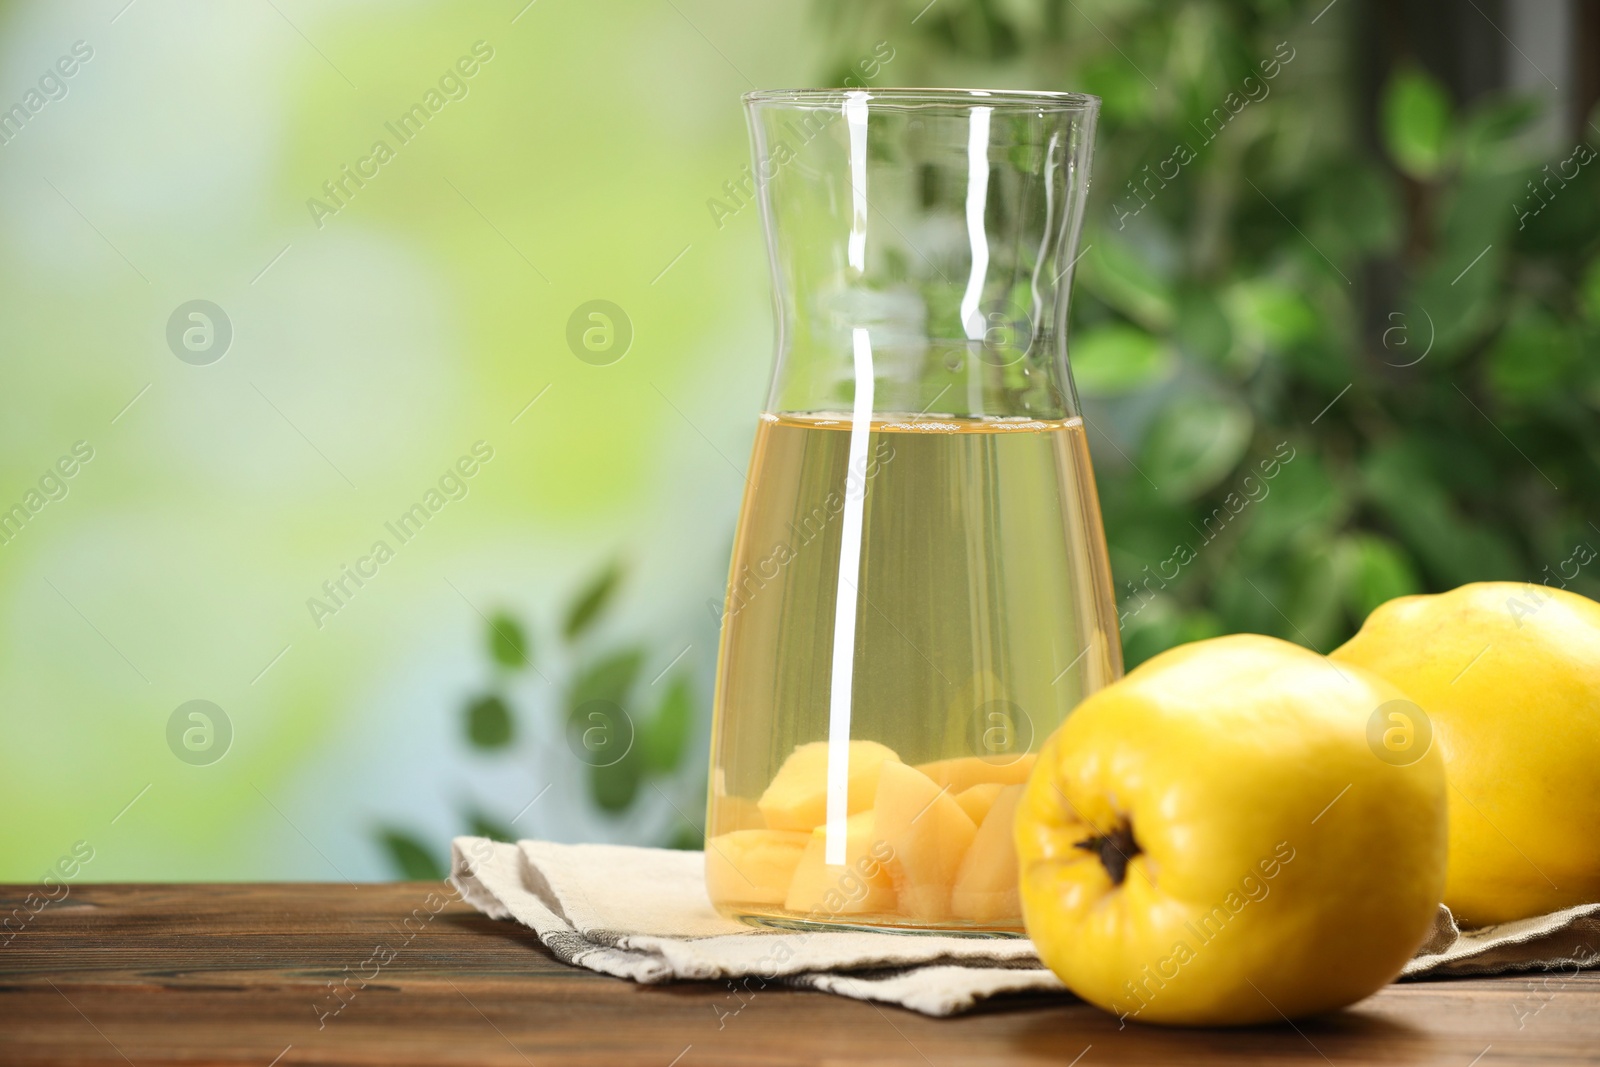 Photo of Delicious quince drink and fresh fruits on wooden table against blurred background. Space for text